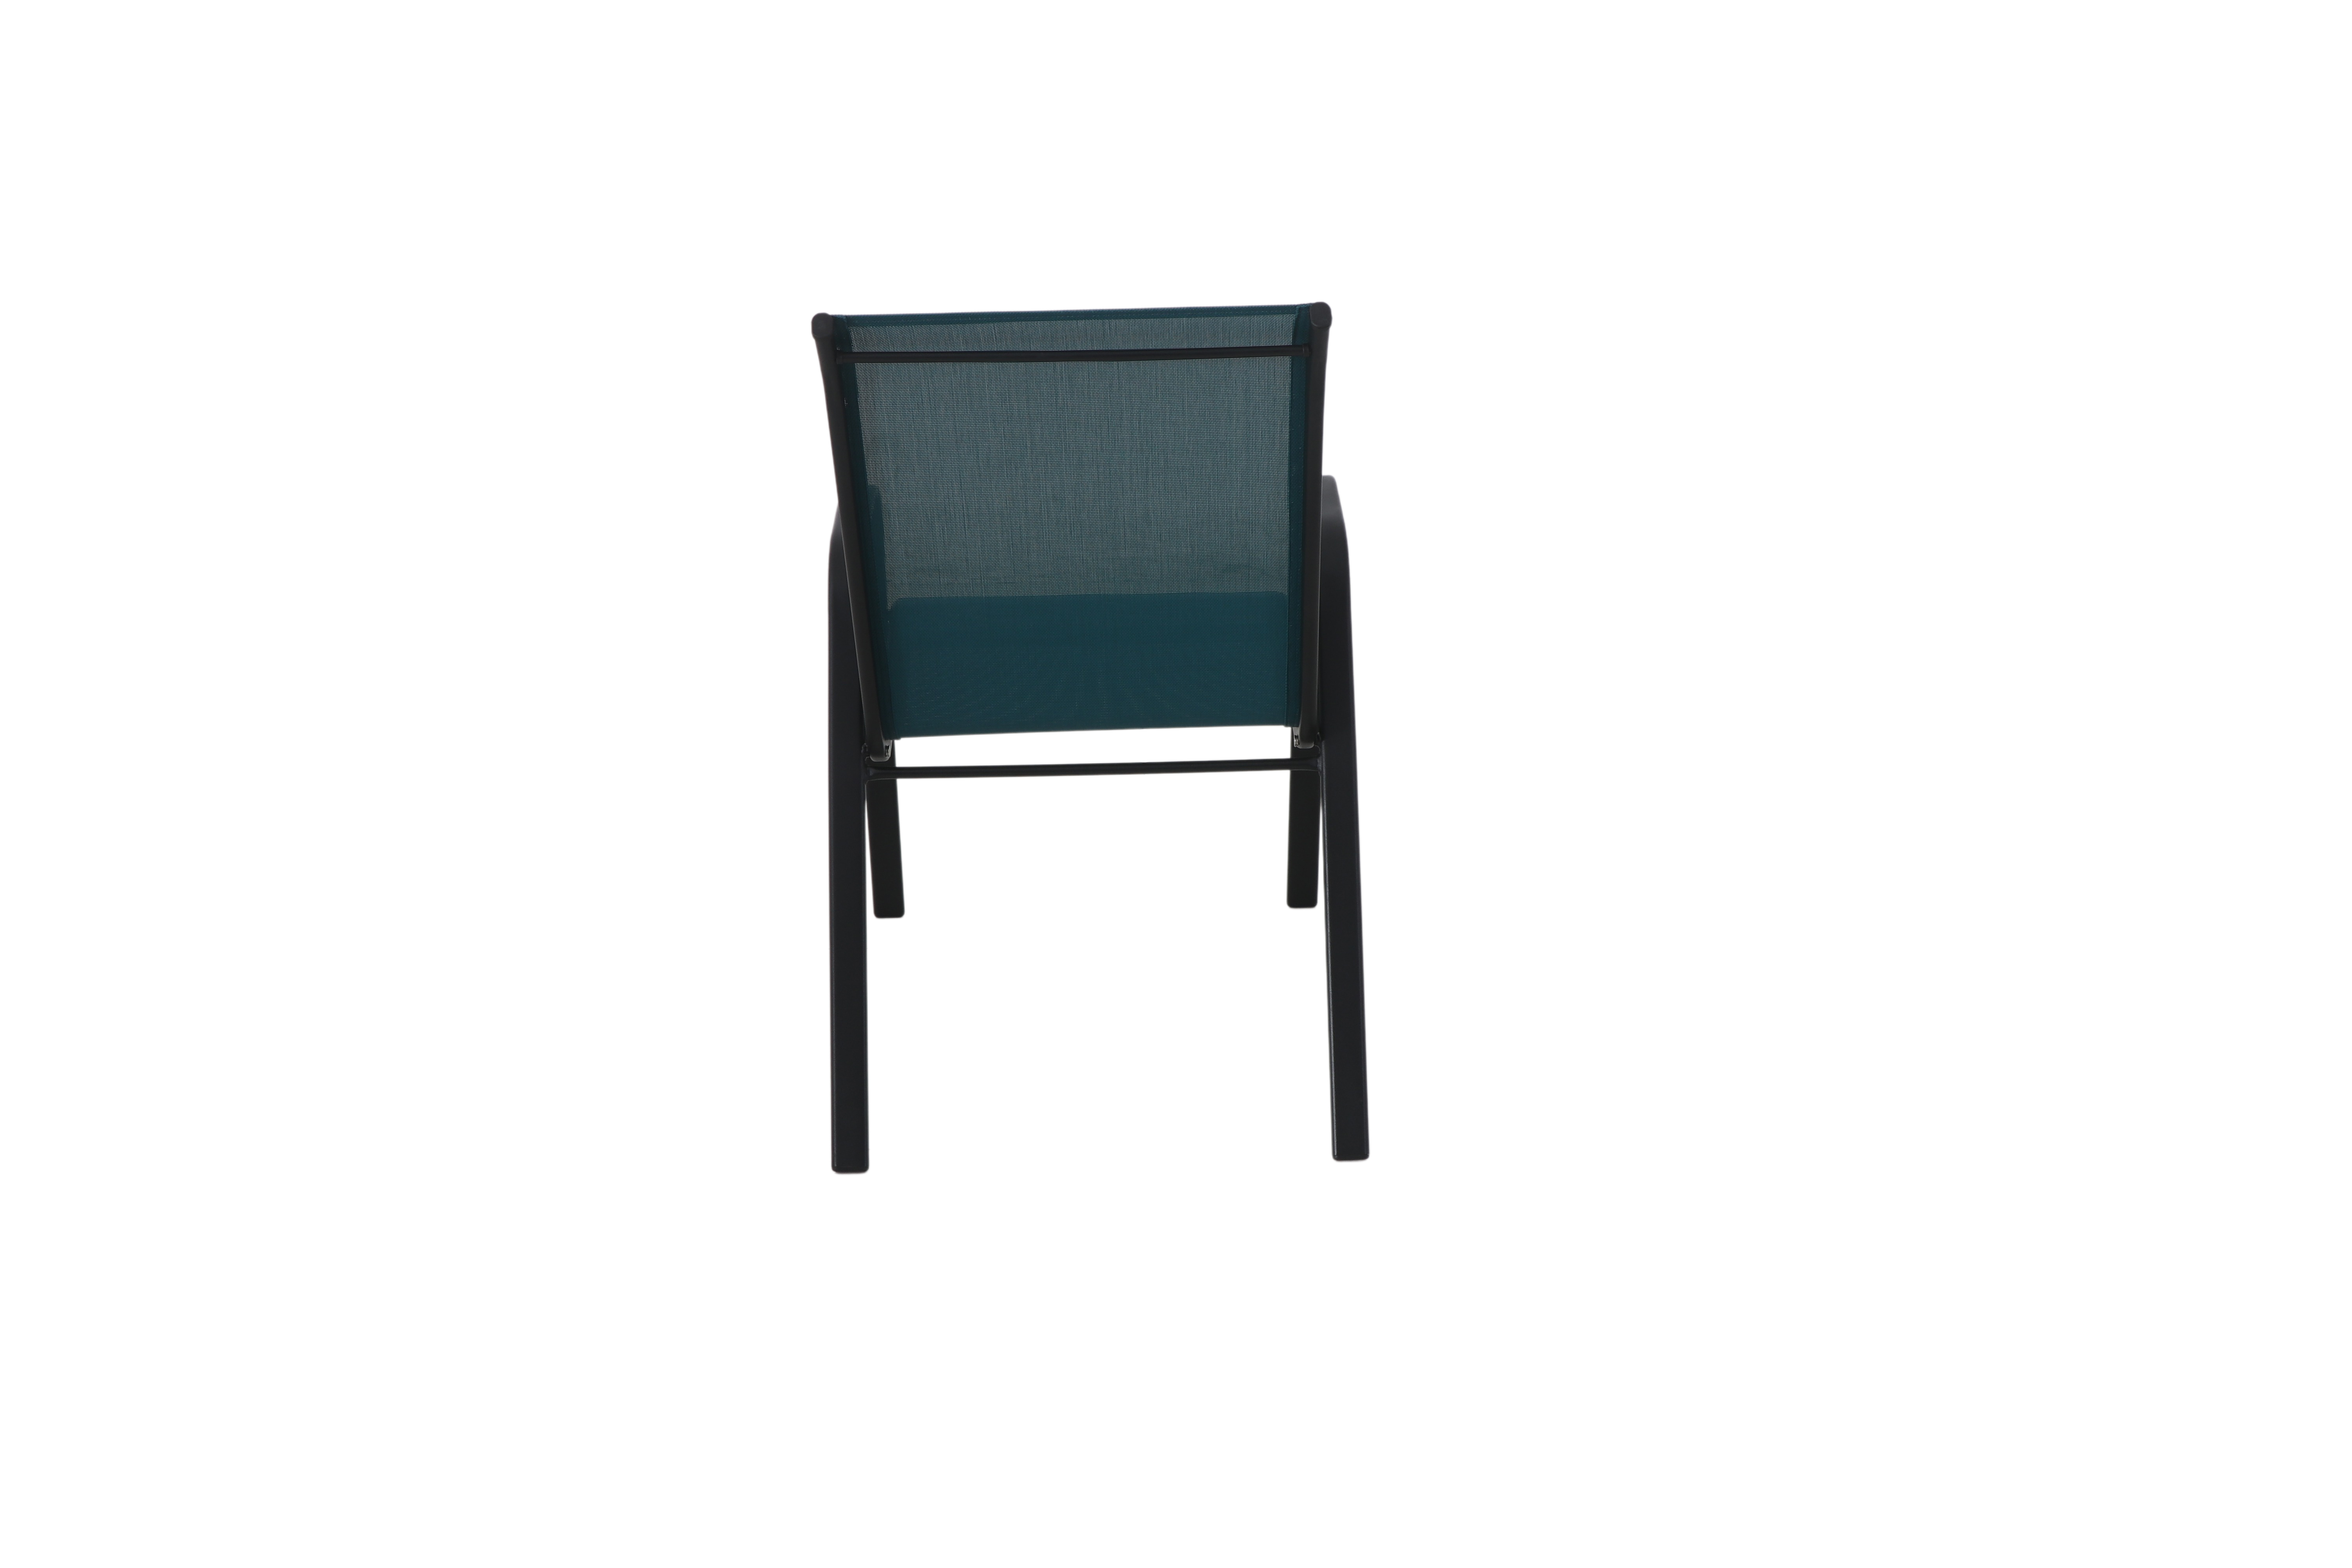 Mainstays Heritage Park Steel Stacking Chair, Teal - image 5 of 9